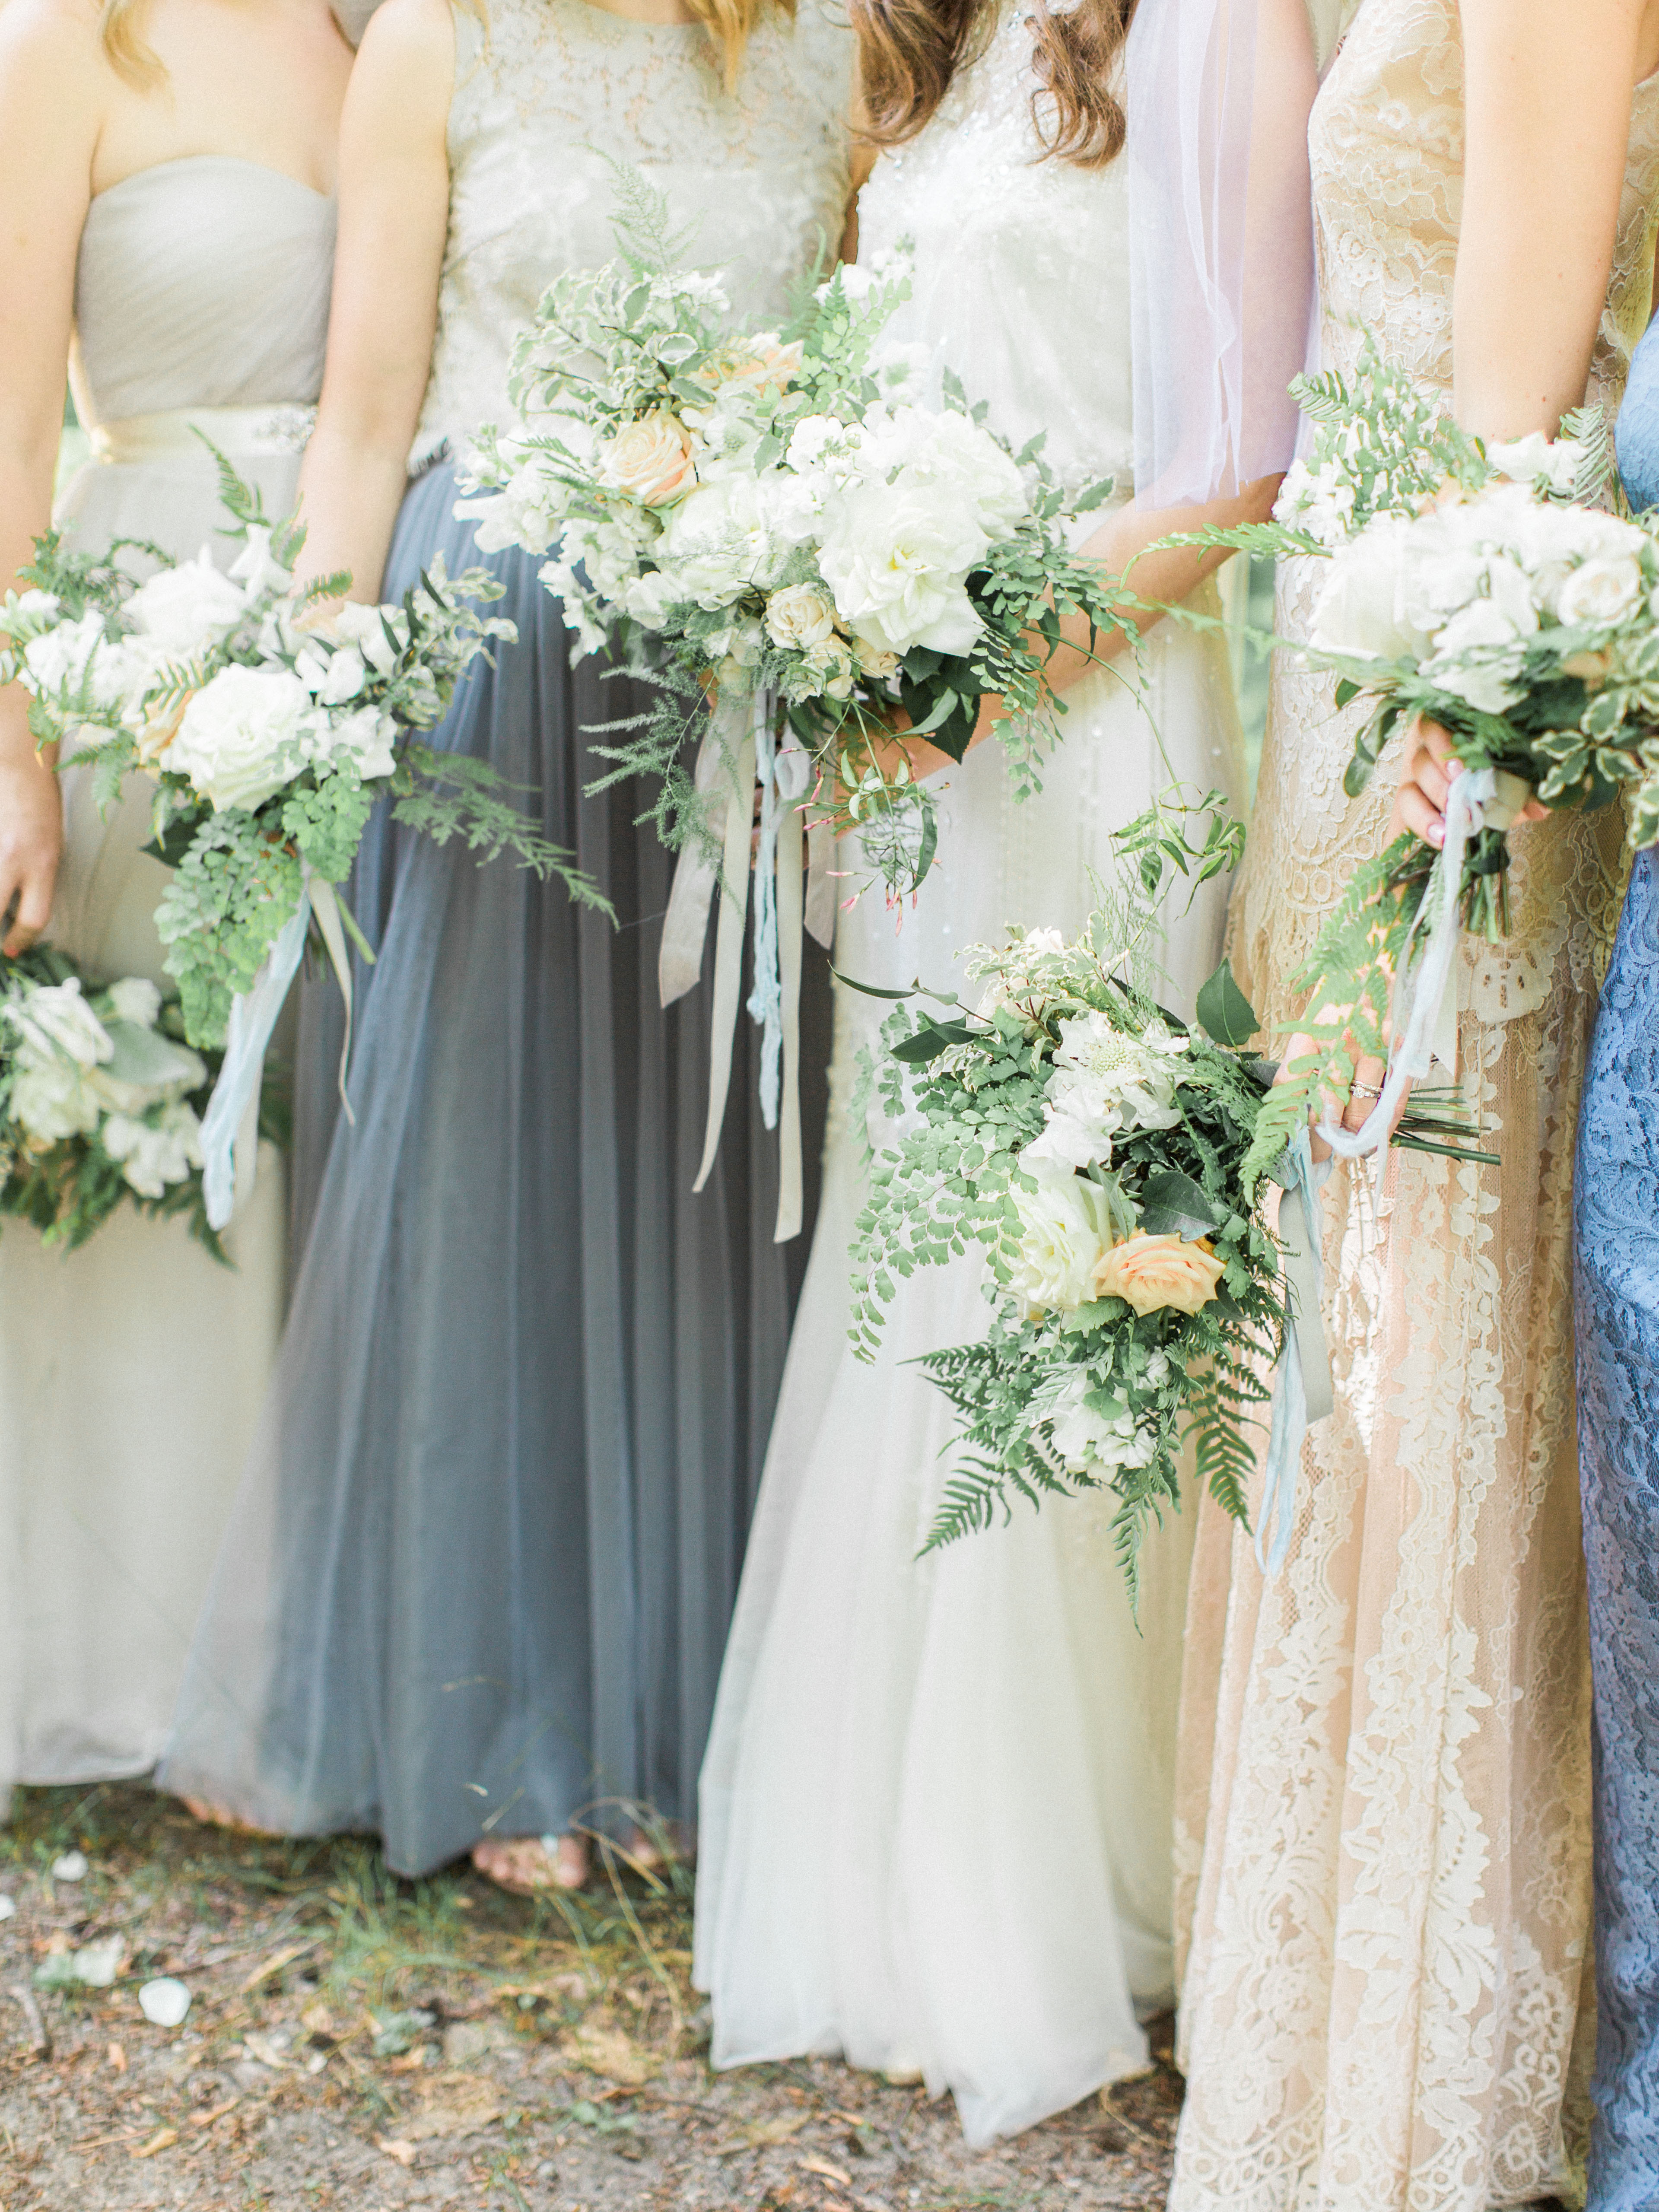 White Bouquet | The Day's Design | Samantha James Photography